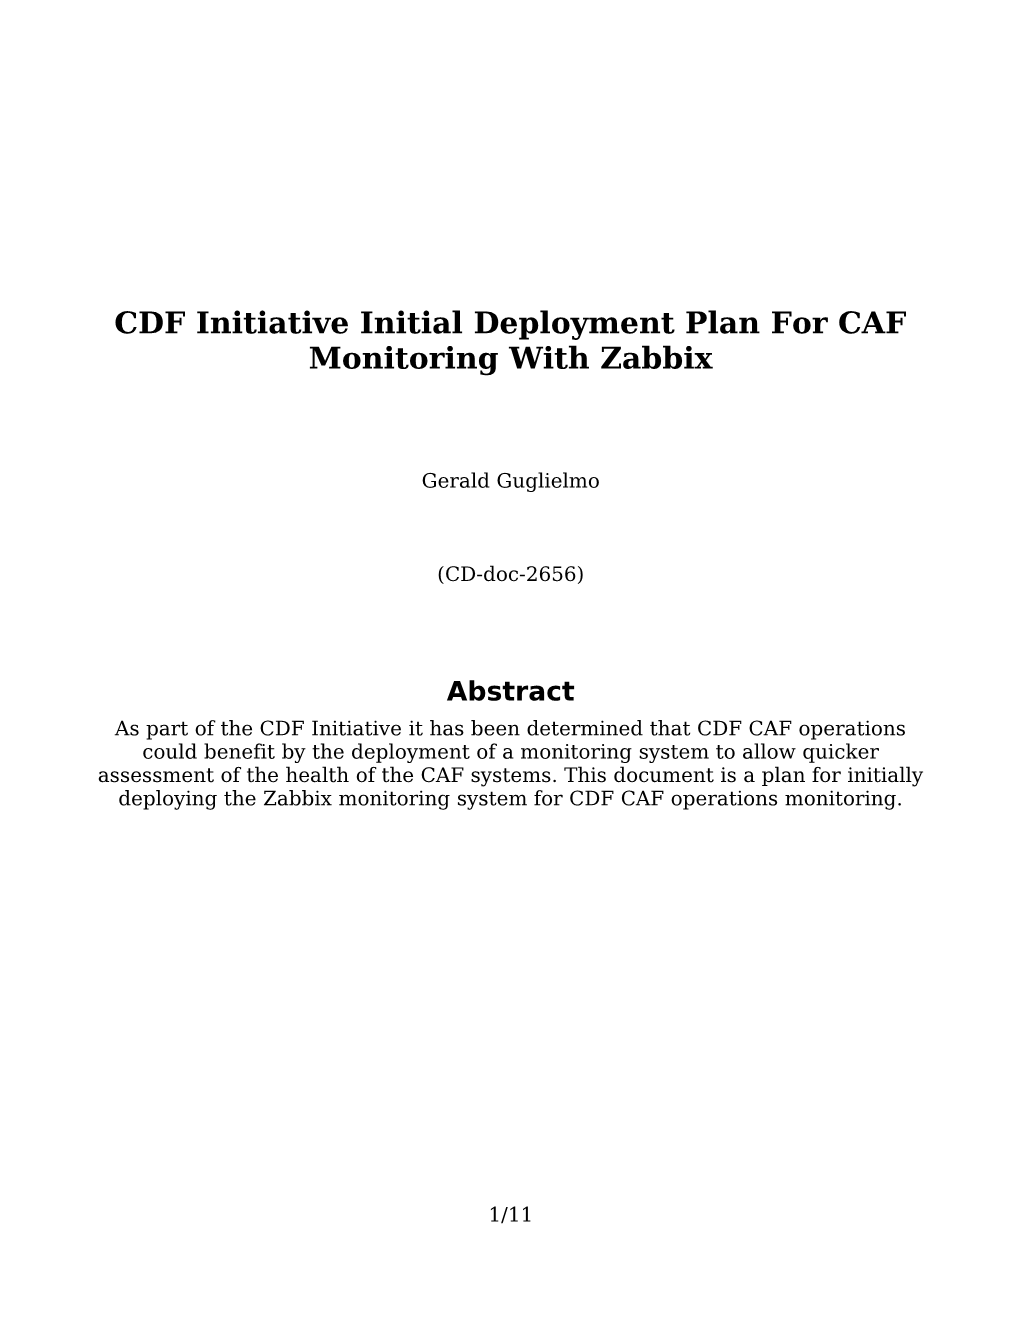 CDF Initiative Initial Deployment Plan for CAF Monitoring with Zabbix